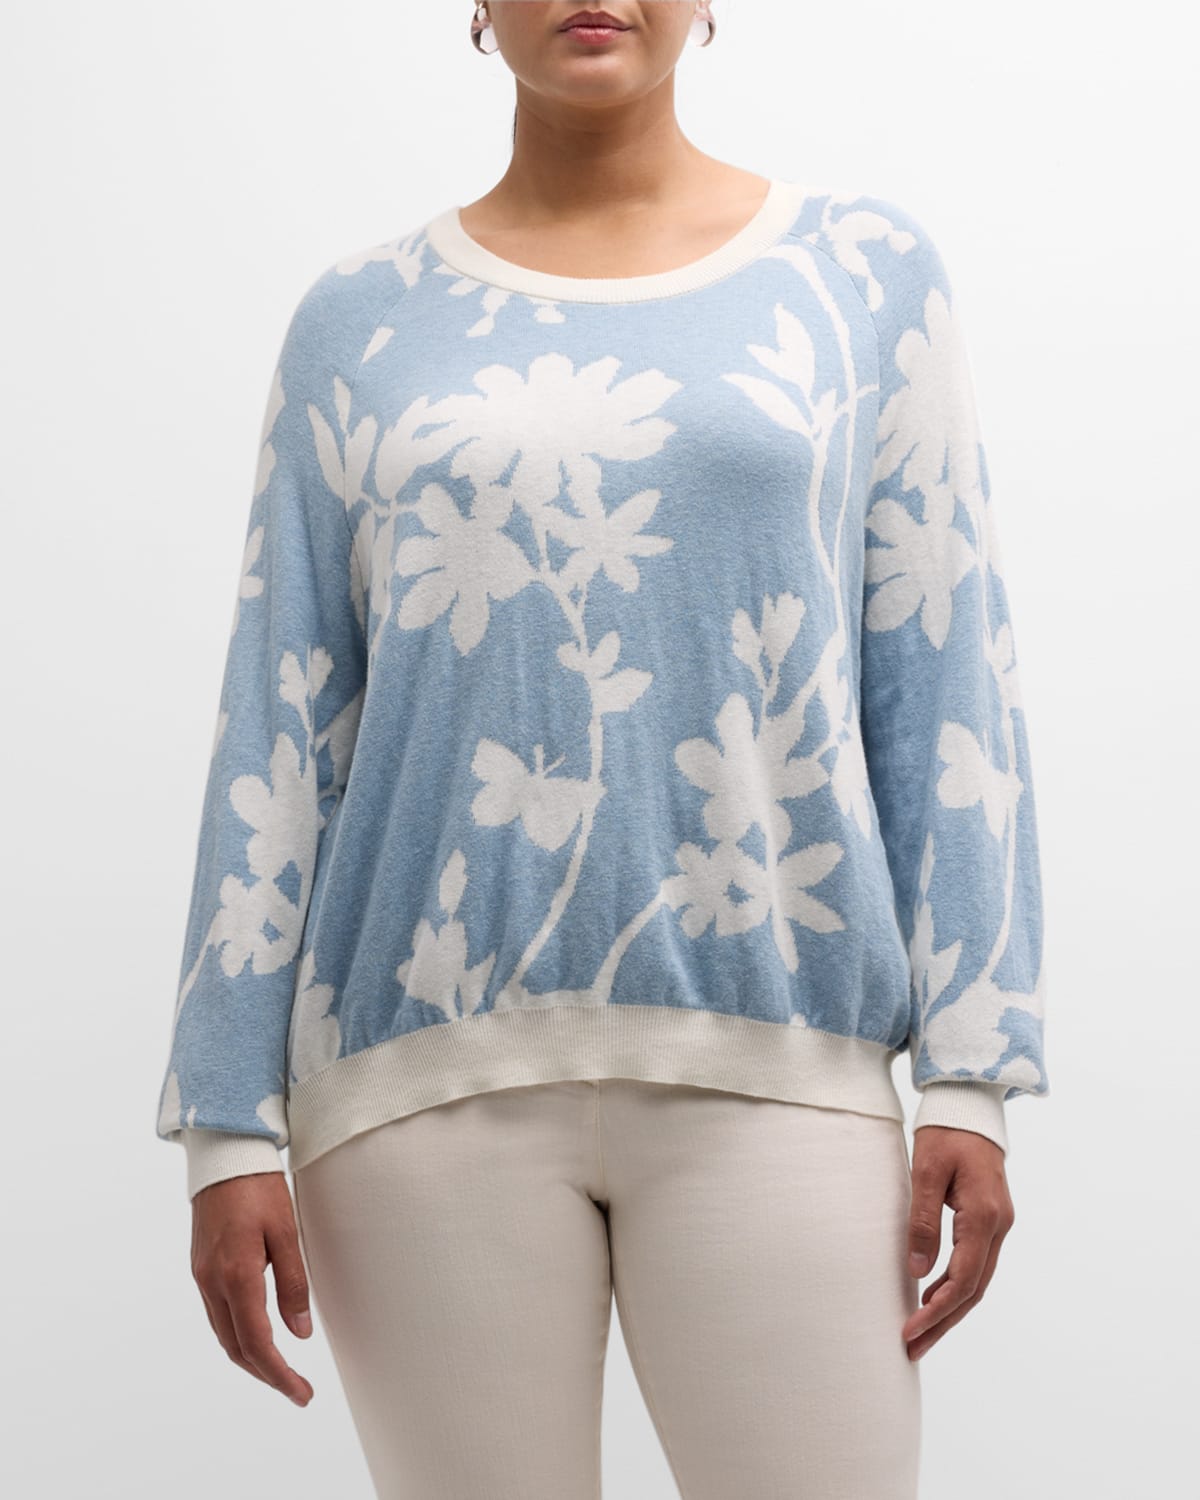 Plus Size Reversible Floral Intarsia Sweater